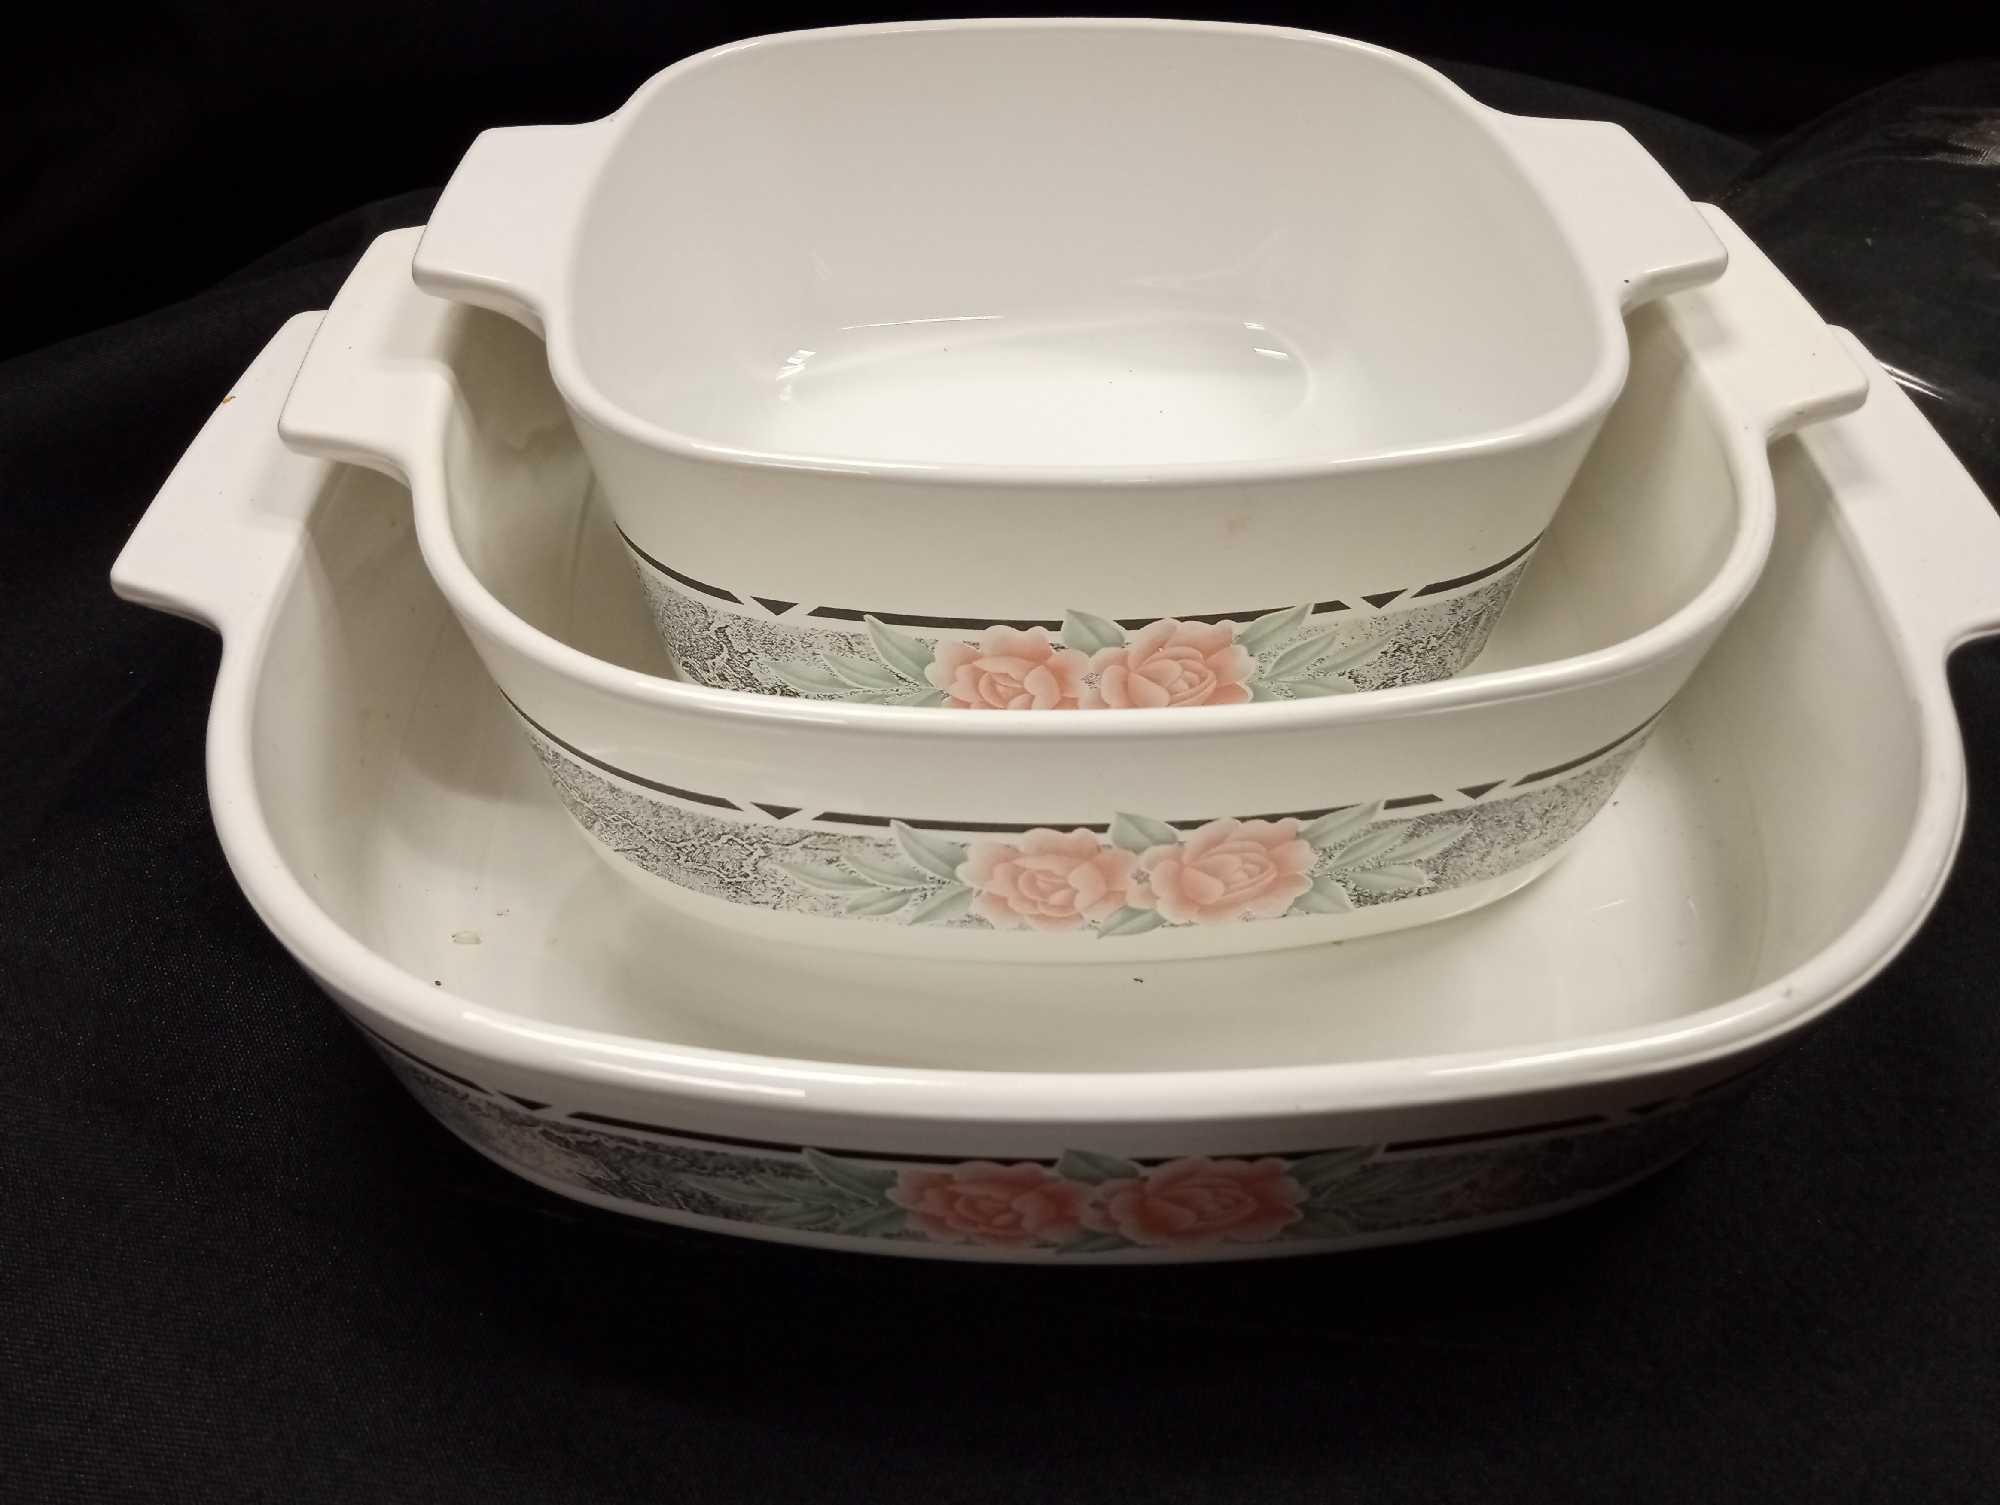 TRIO OF SILK AND ROSES CORELLE BY CORNINGWARE HANDLED BAKING DISHES WITH LIDS